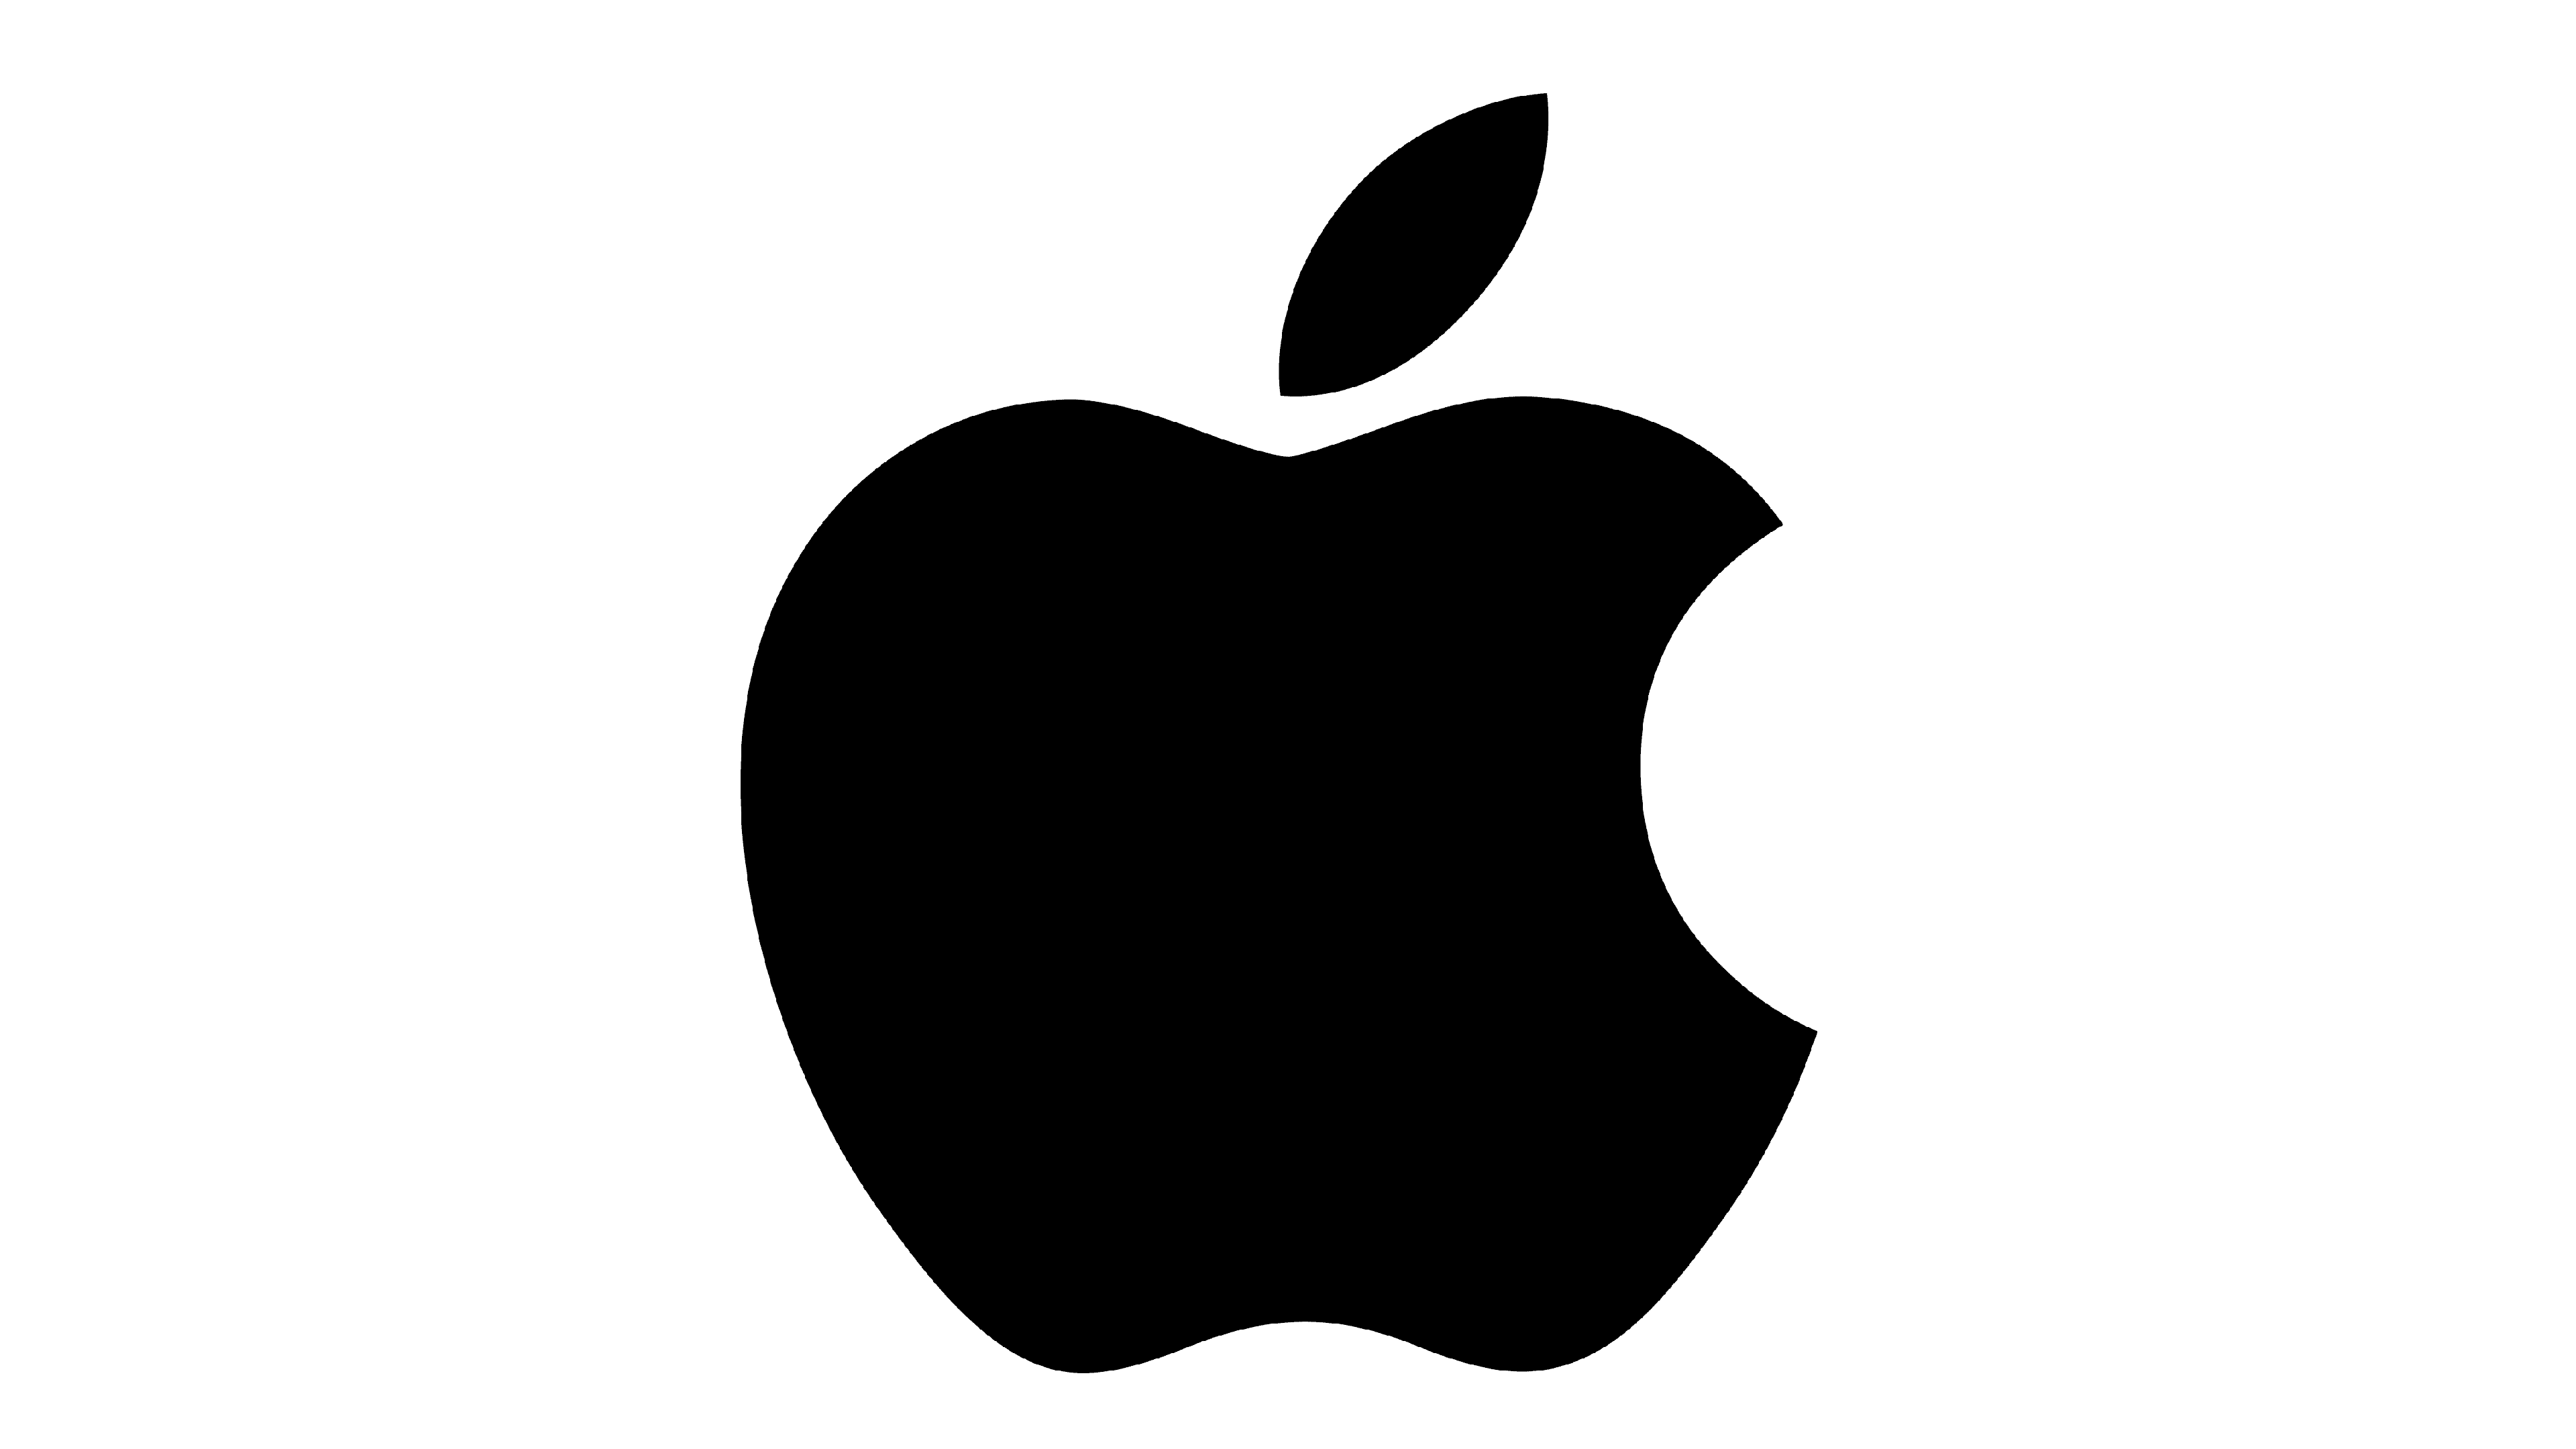 Cleaning Need - Apple